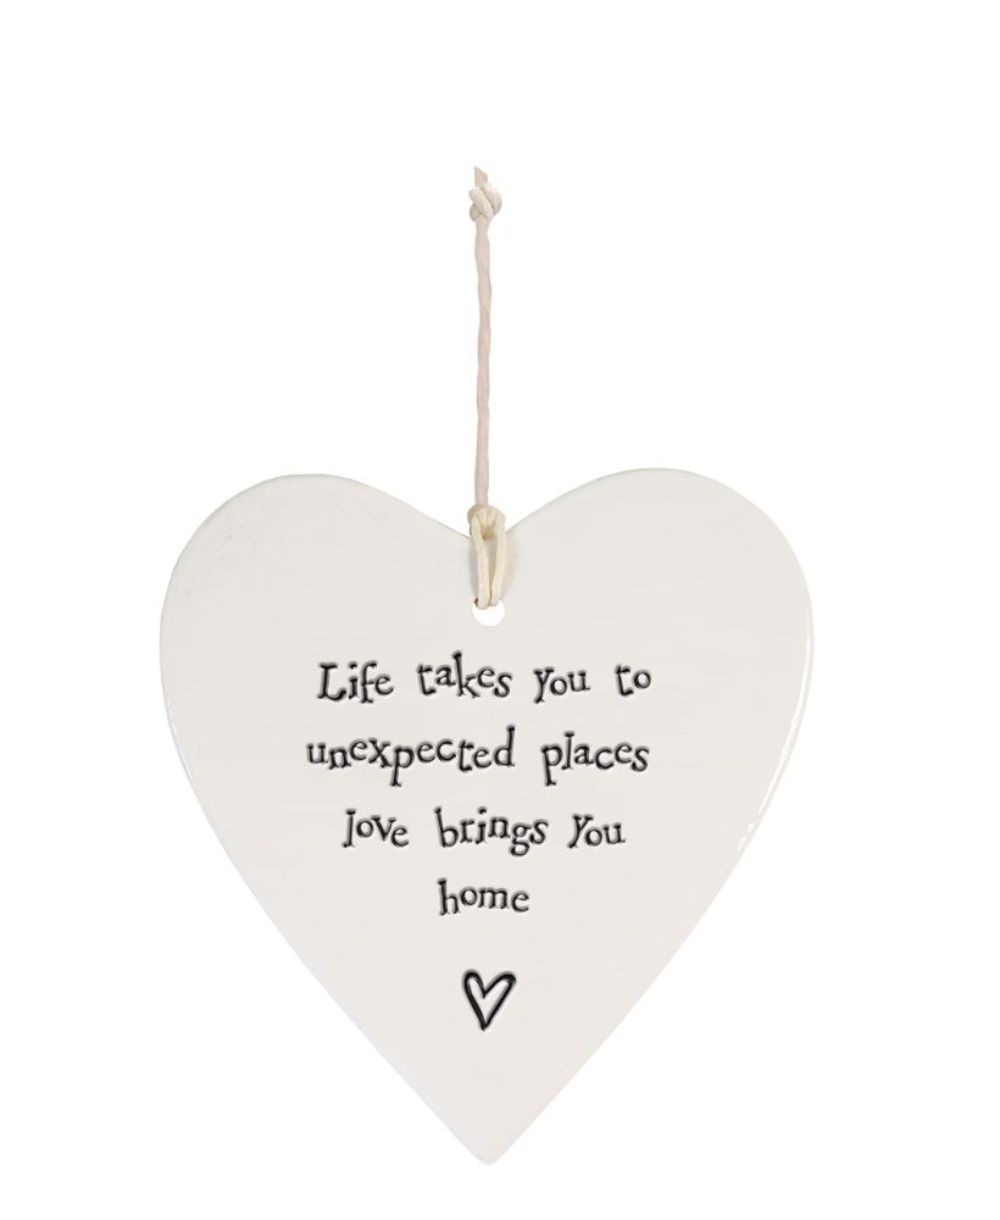 East Of India Love Brings You Home Heart Shaped Ceramic Hanging Plaque